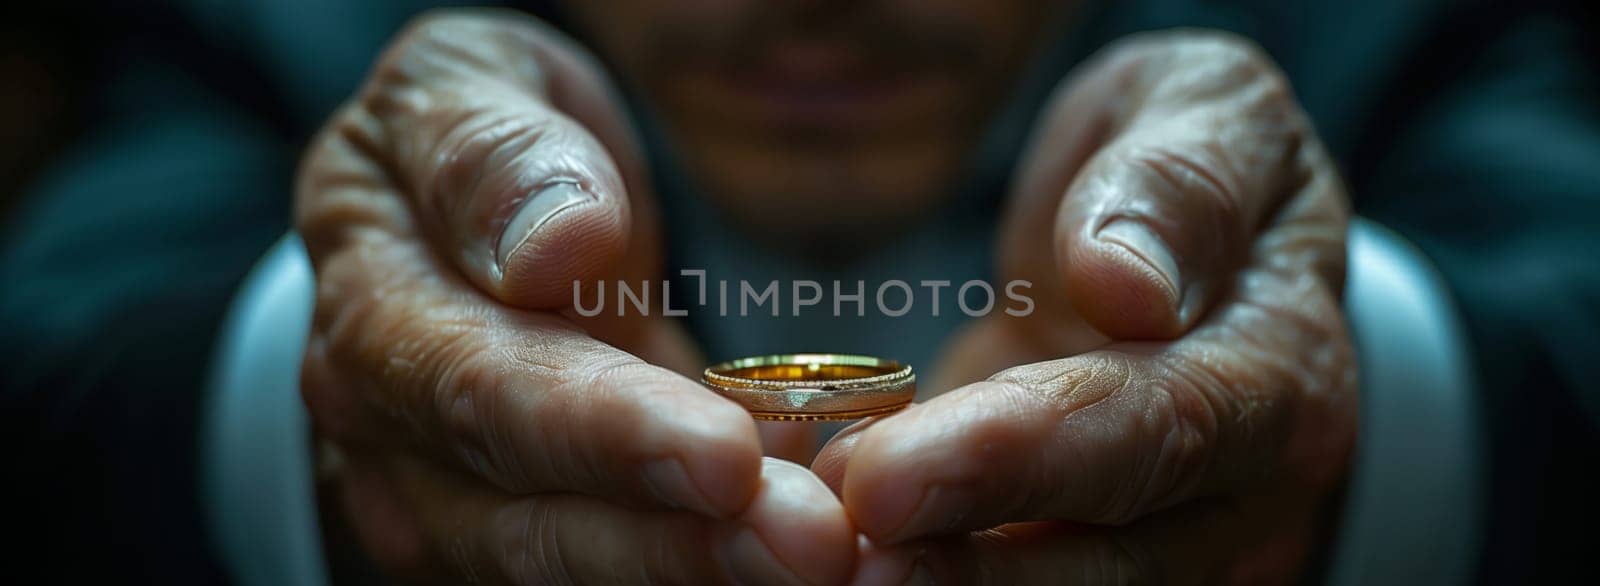 A man makes a gesture with a wedding ring in his hand by richwolf